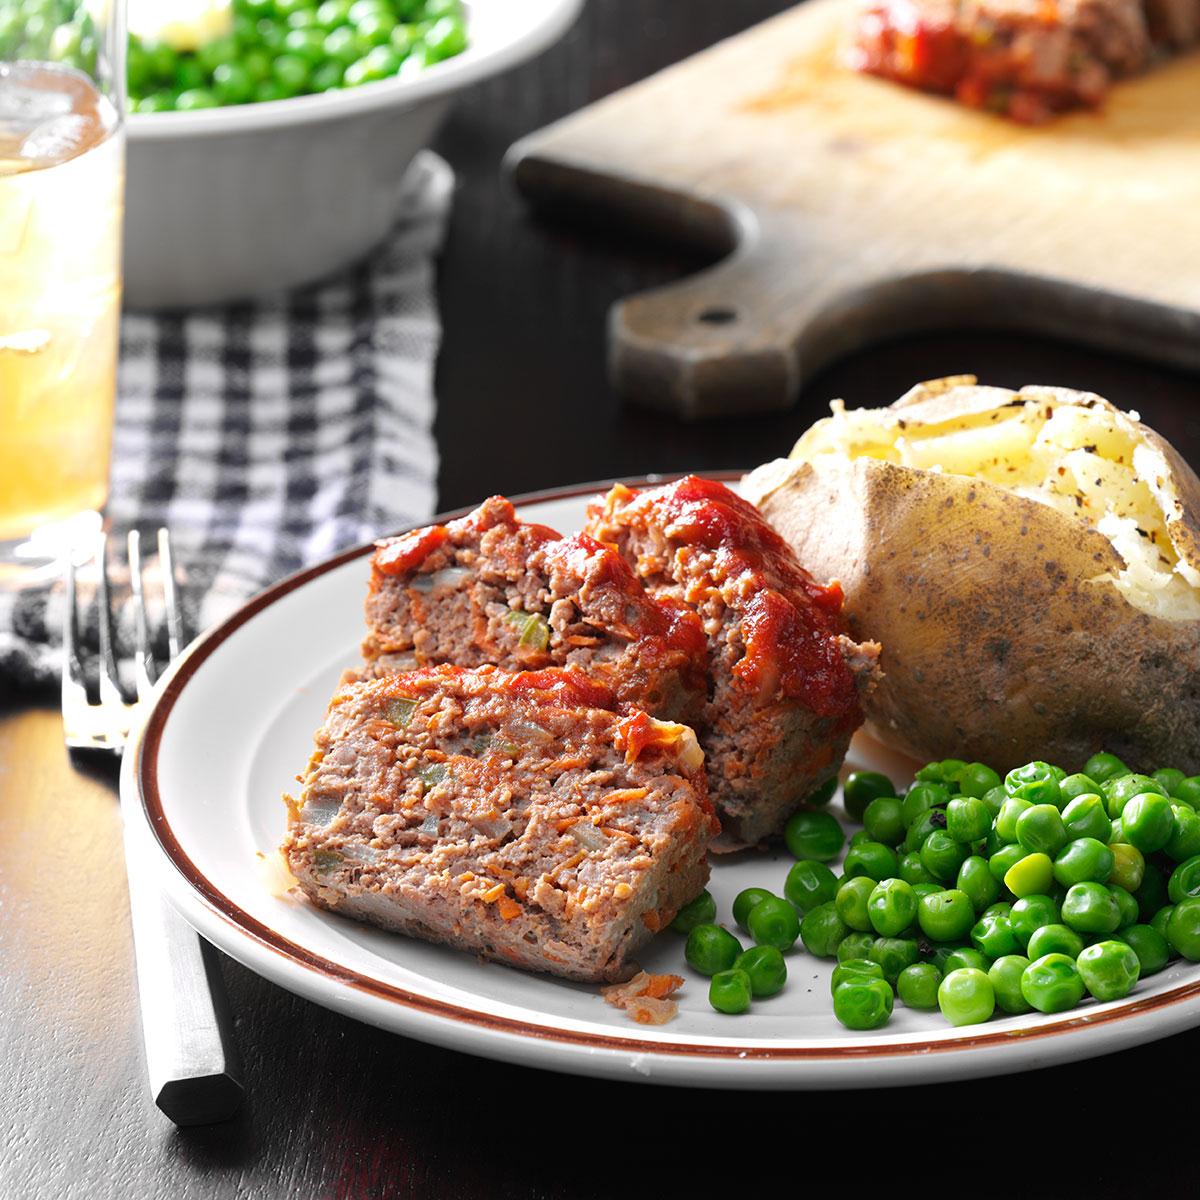 Vegetable Meat Loaf Recipe: How to Make It